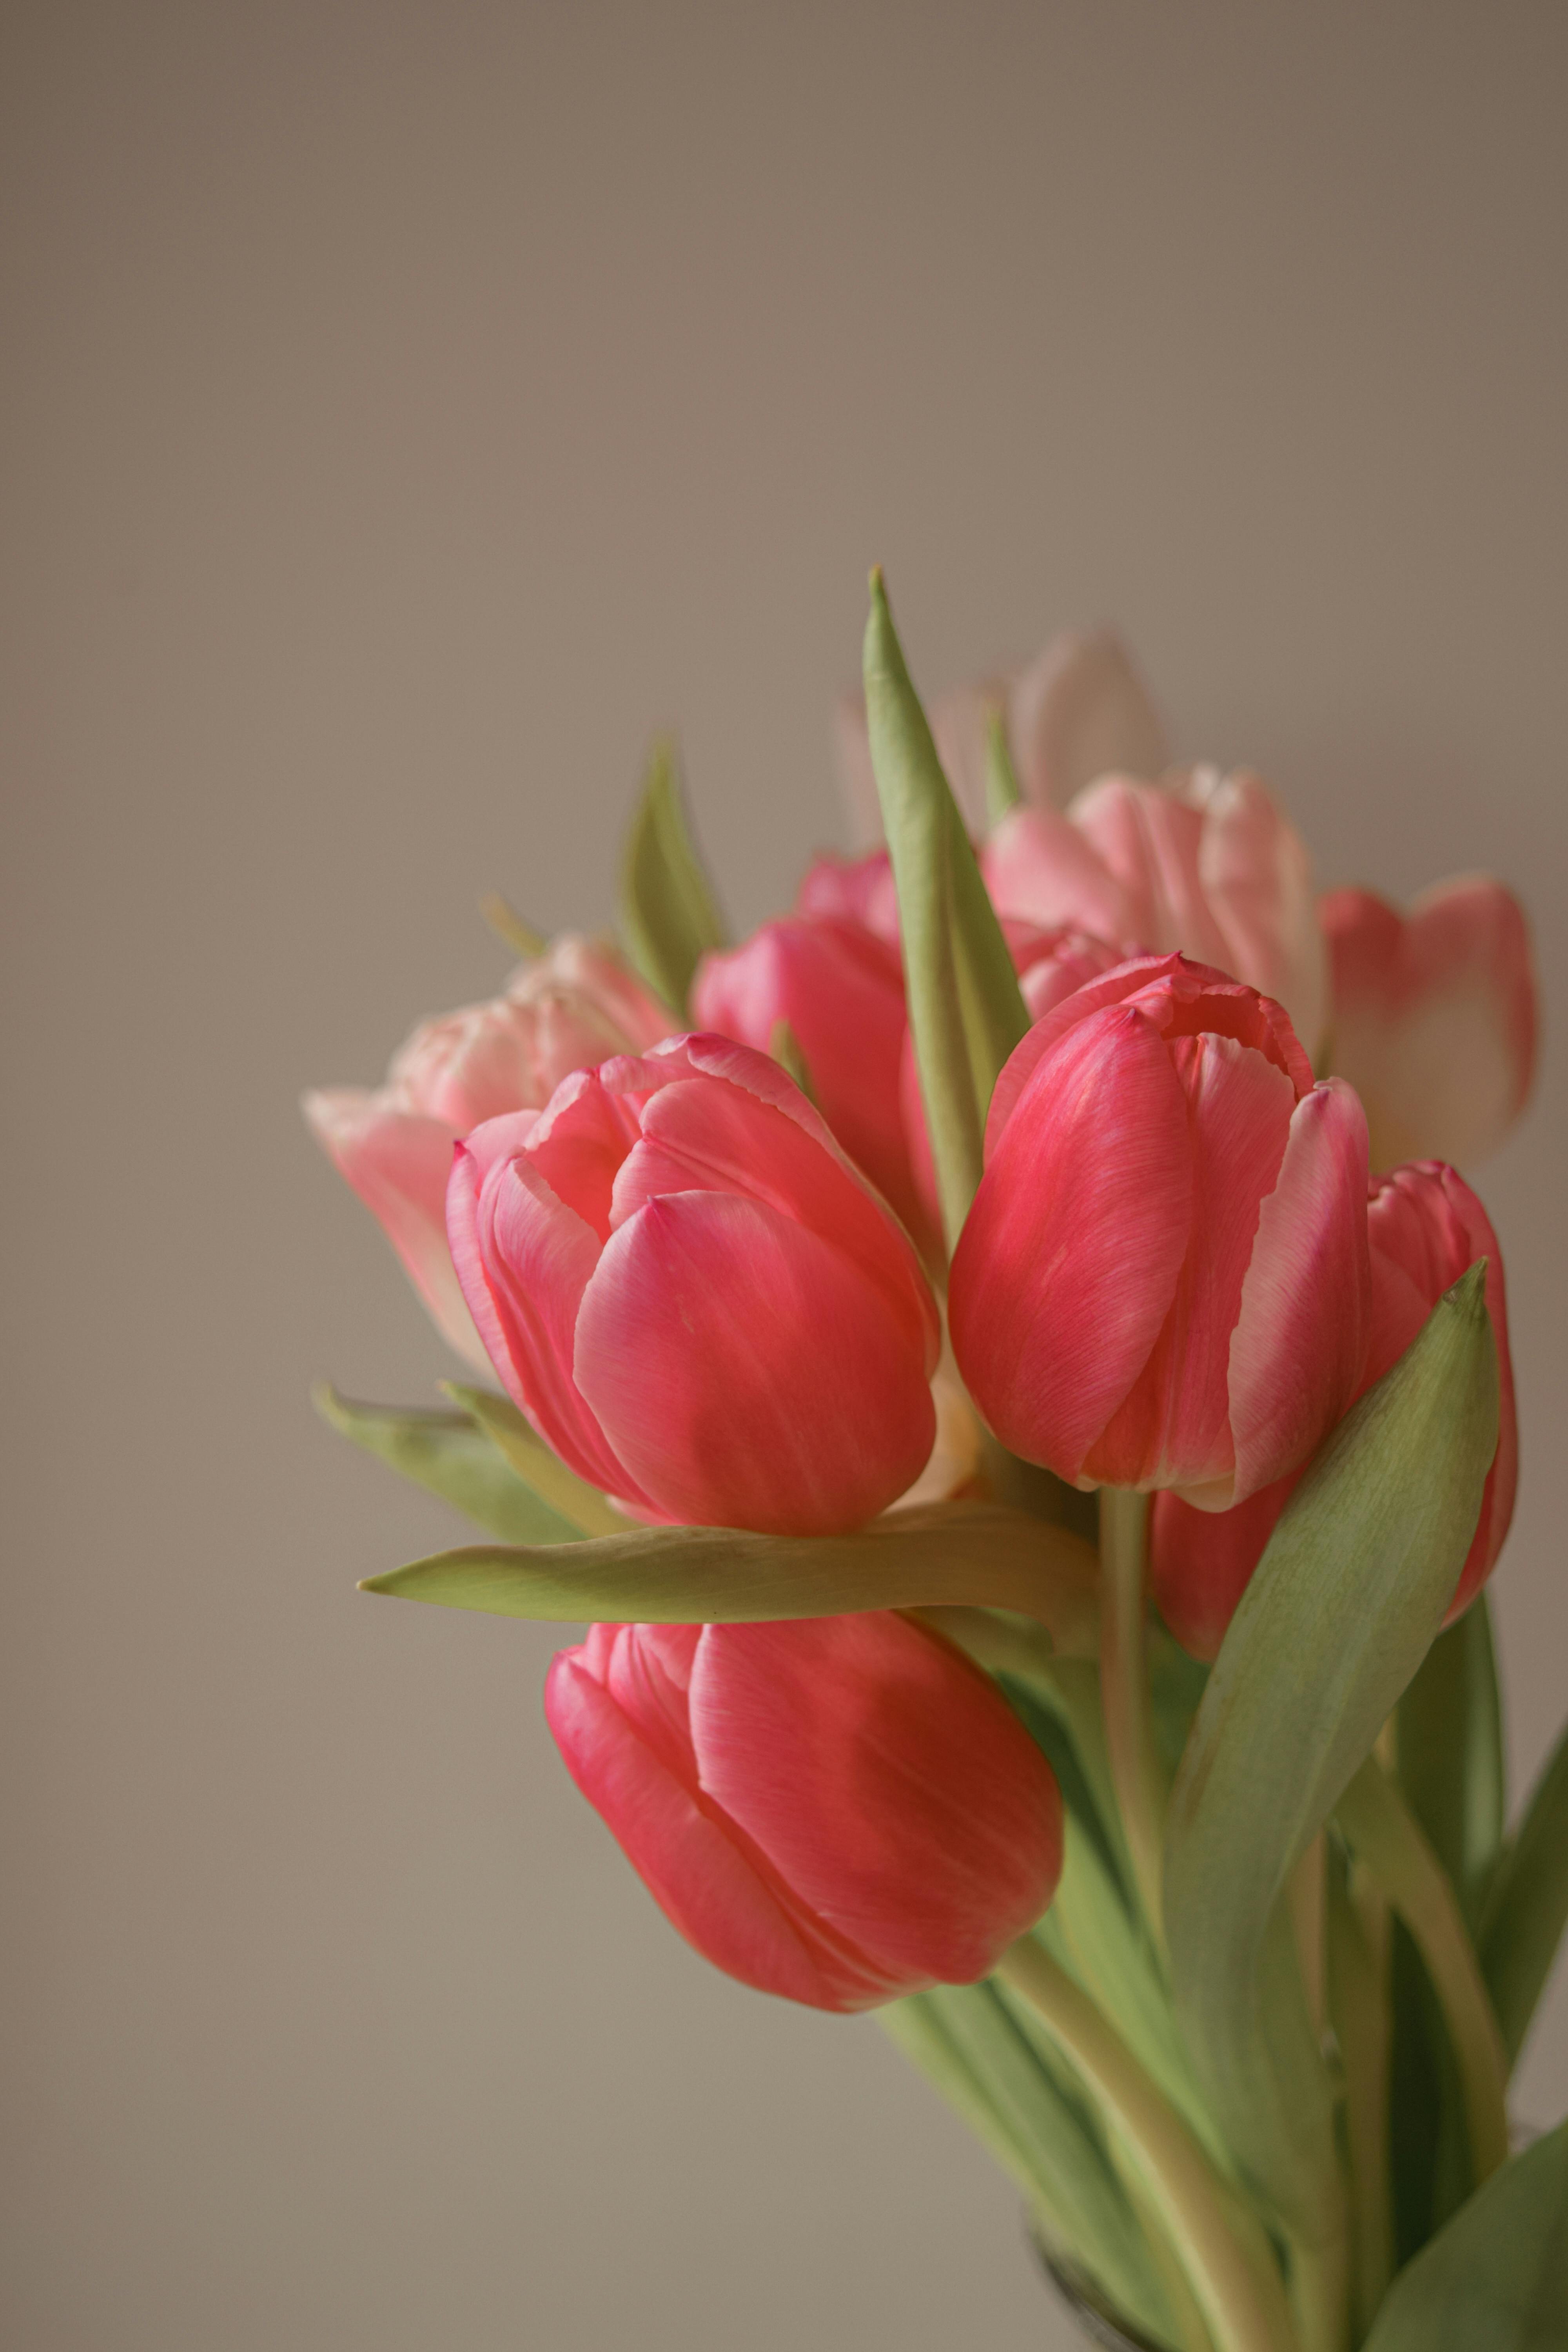 25,032+ Best Free Pink tulips Stock Photos & Images · 100% Royalty-Free ...